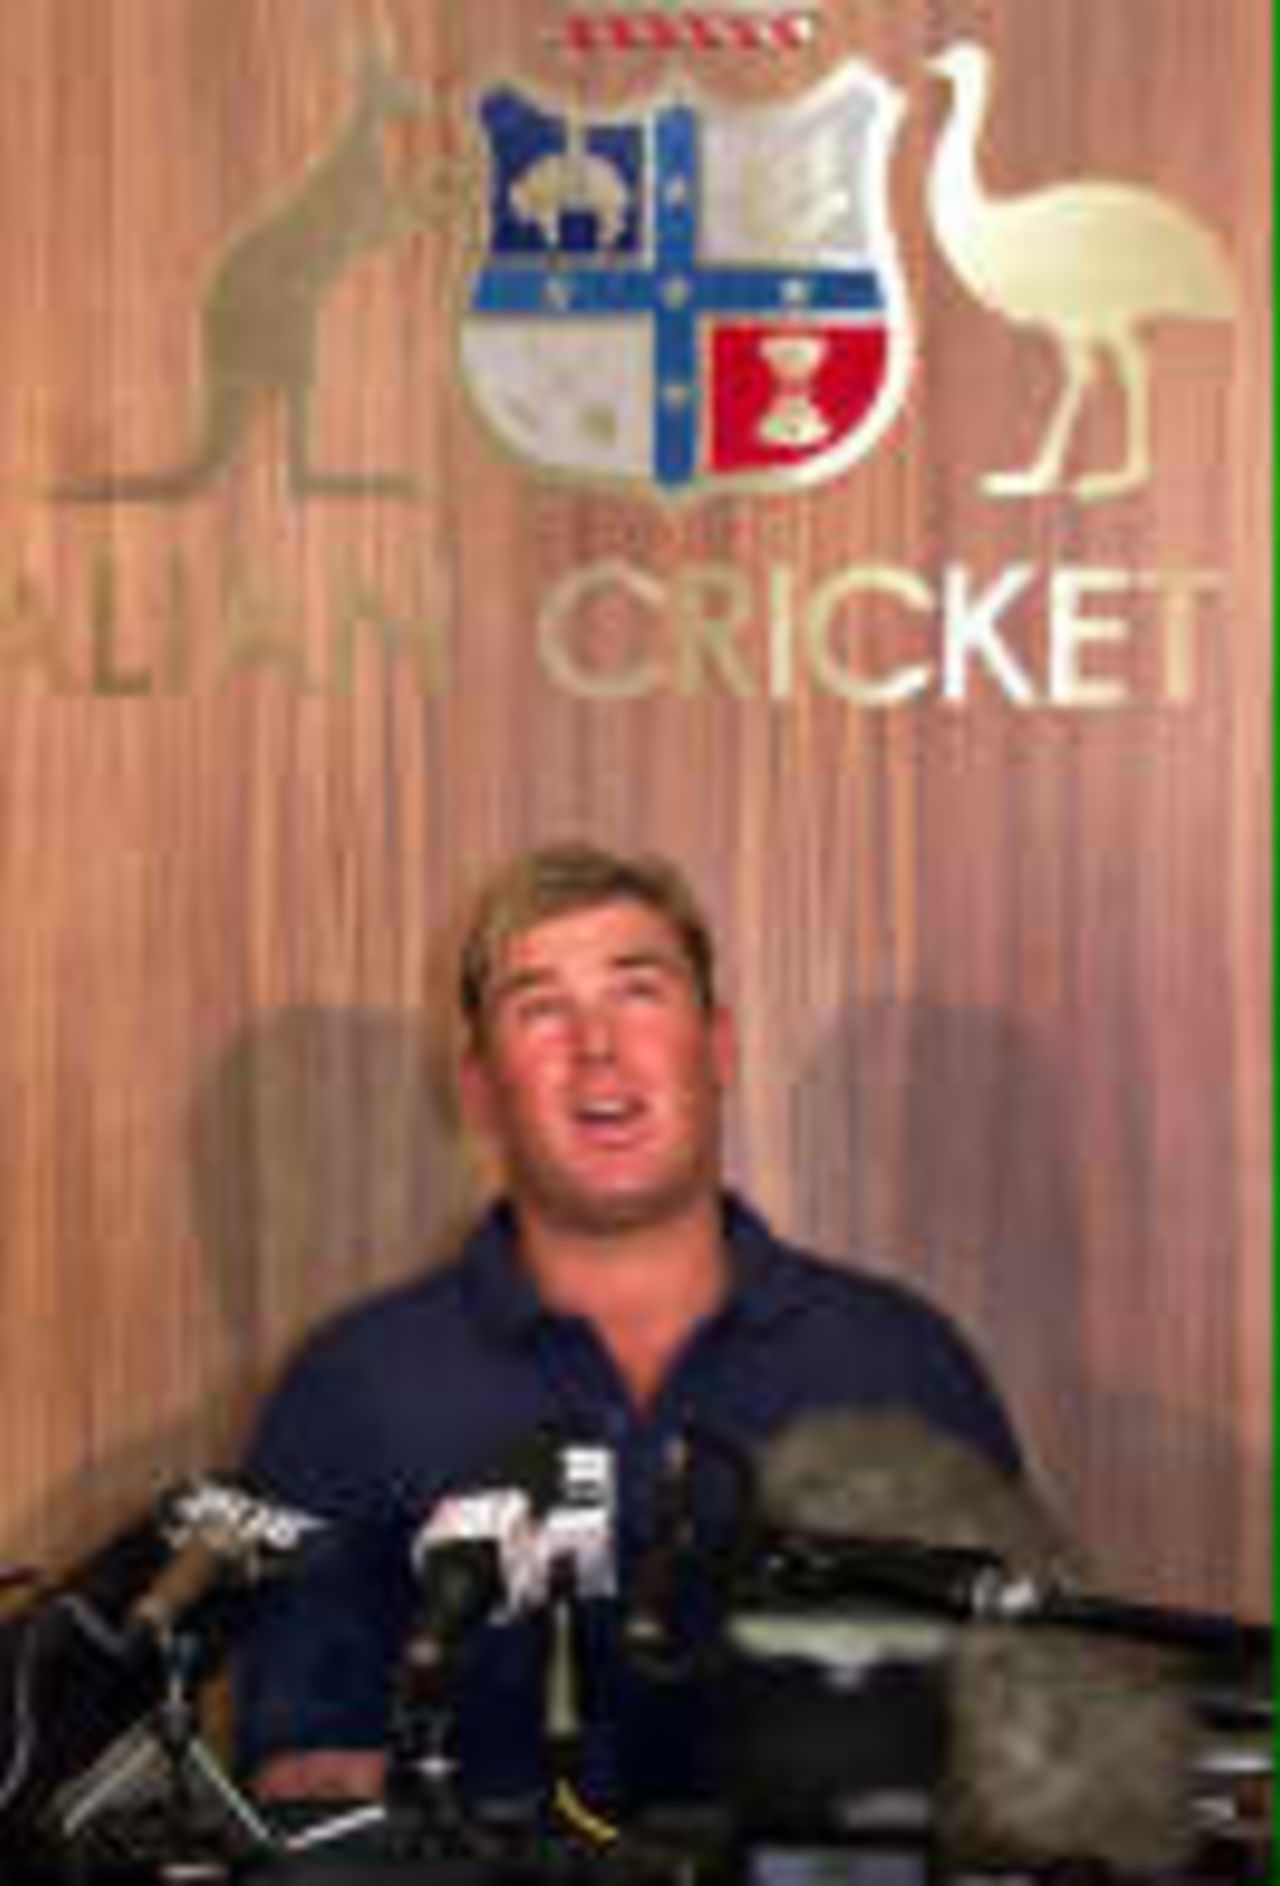 Warne at the press confrence announcing his inclusion in the 5th test squad - England in Australia 1998